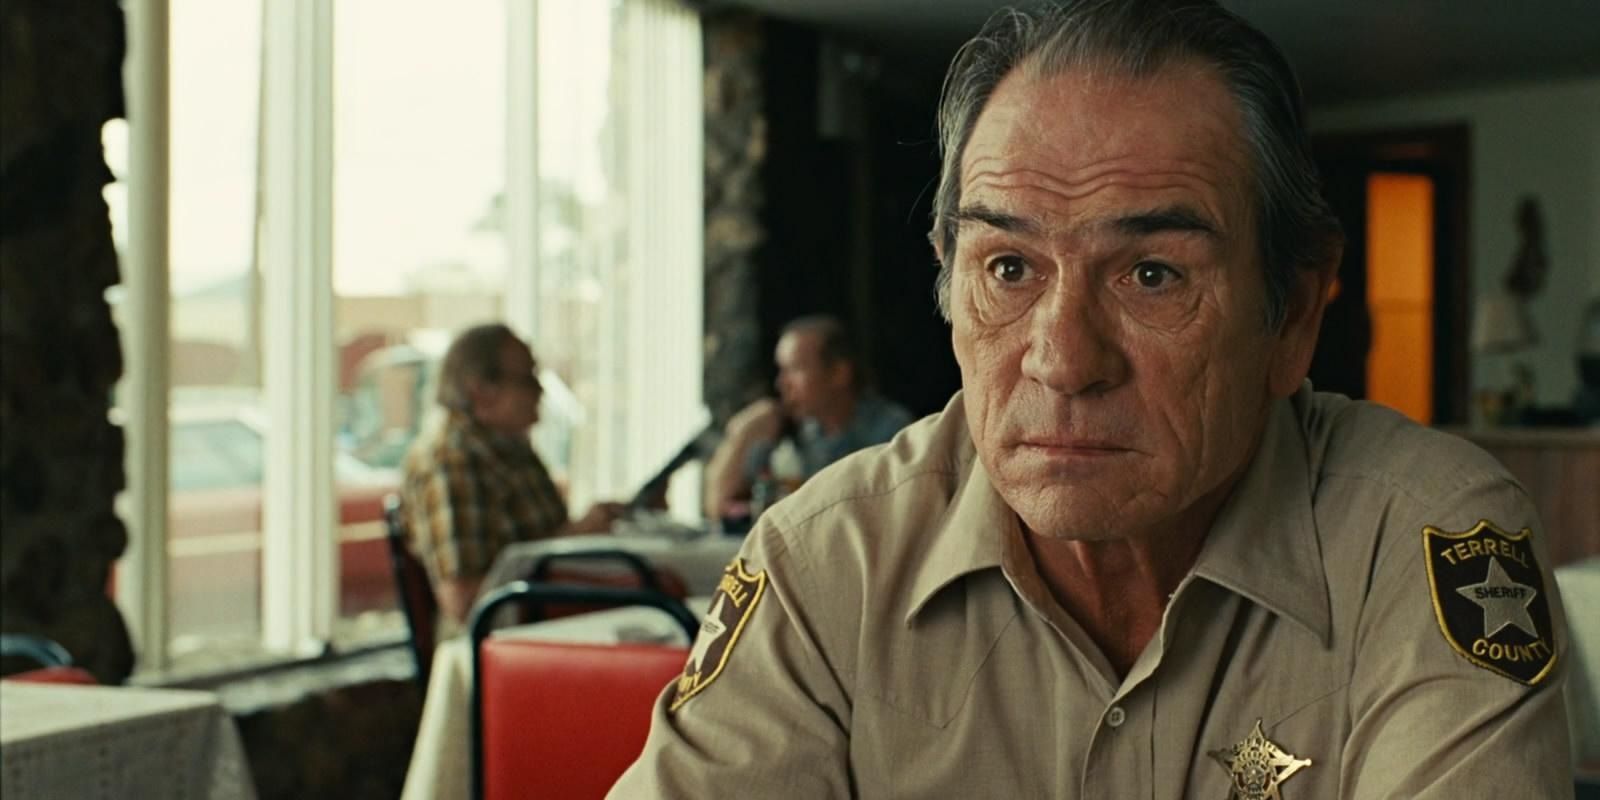 No Country For Old Men Ending Explained: You Can't Stop What's Coming